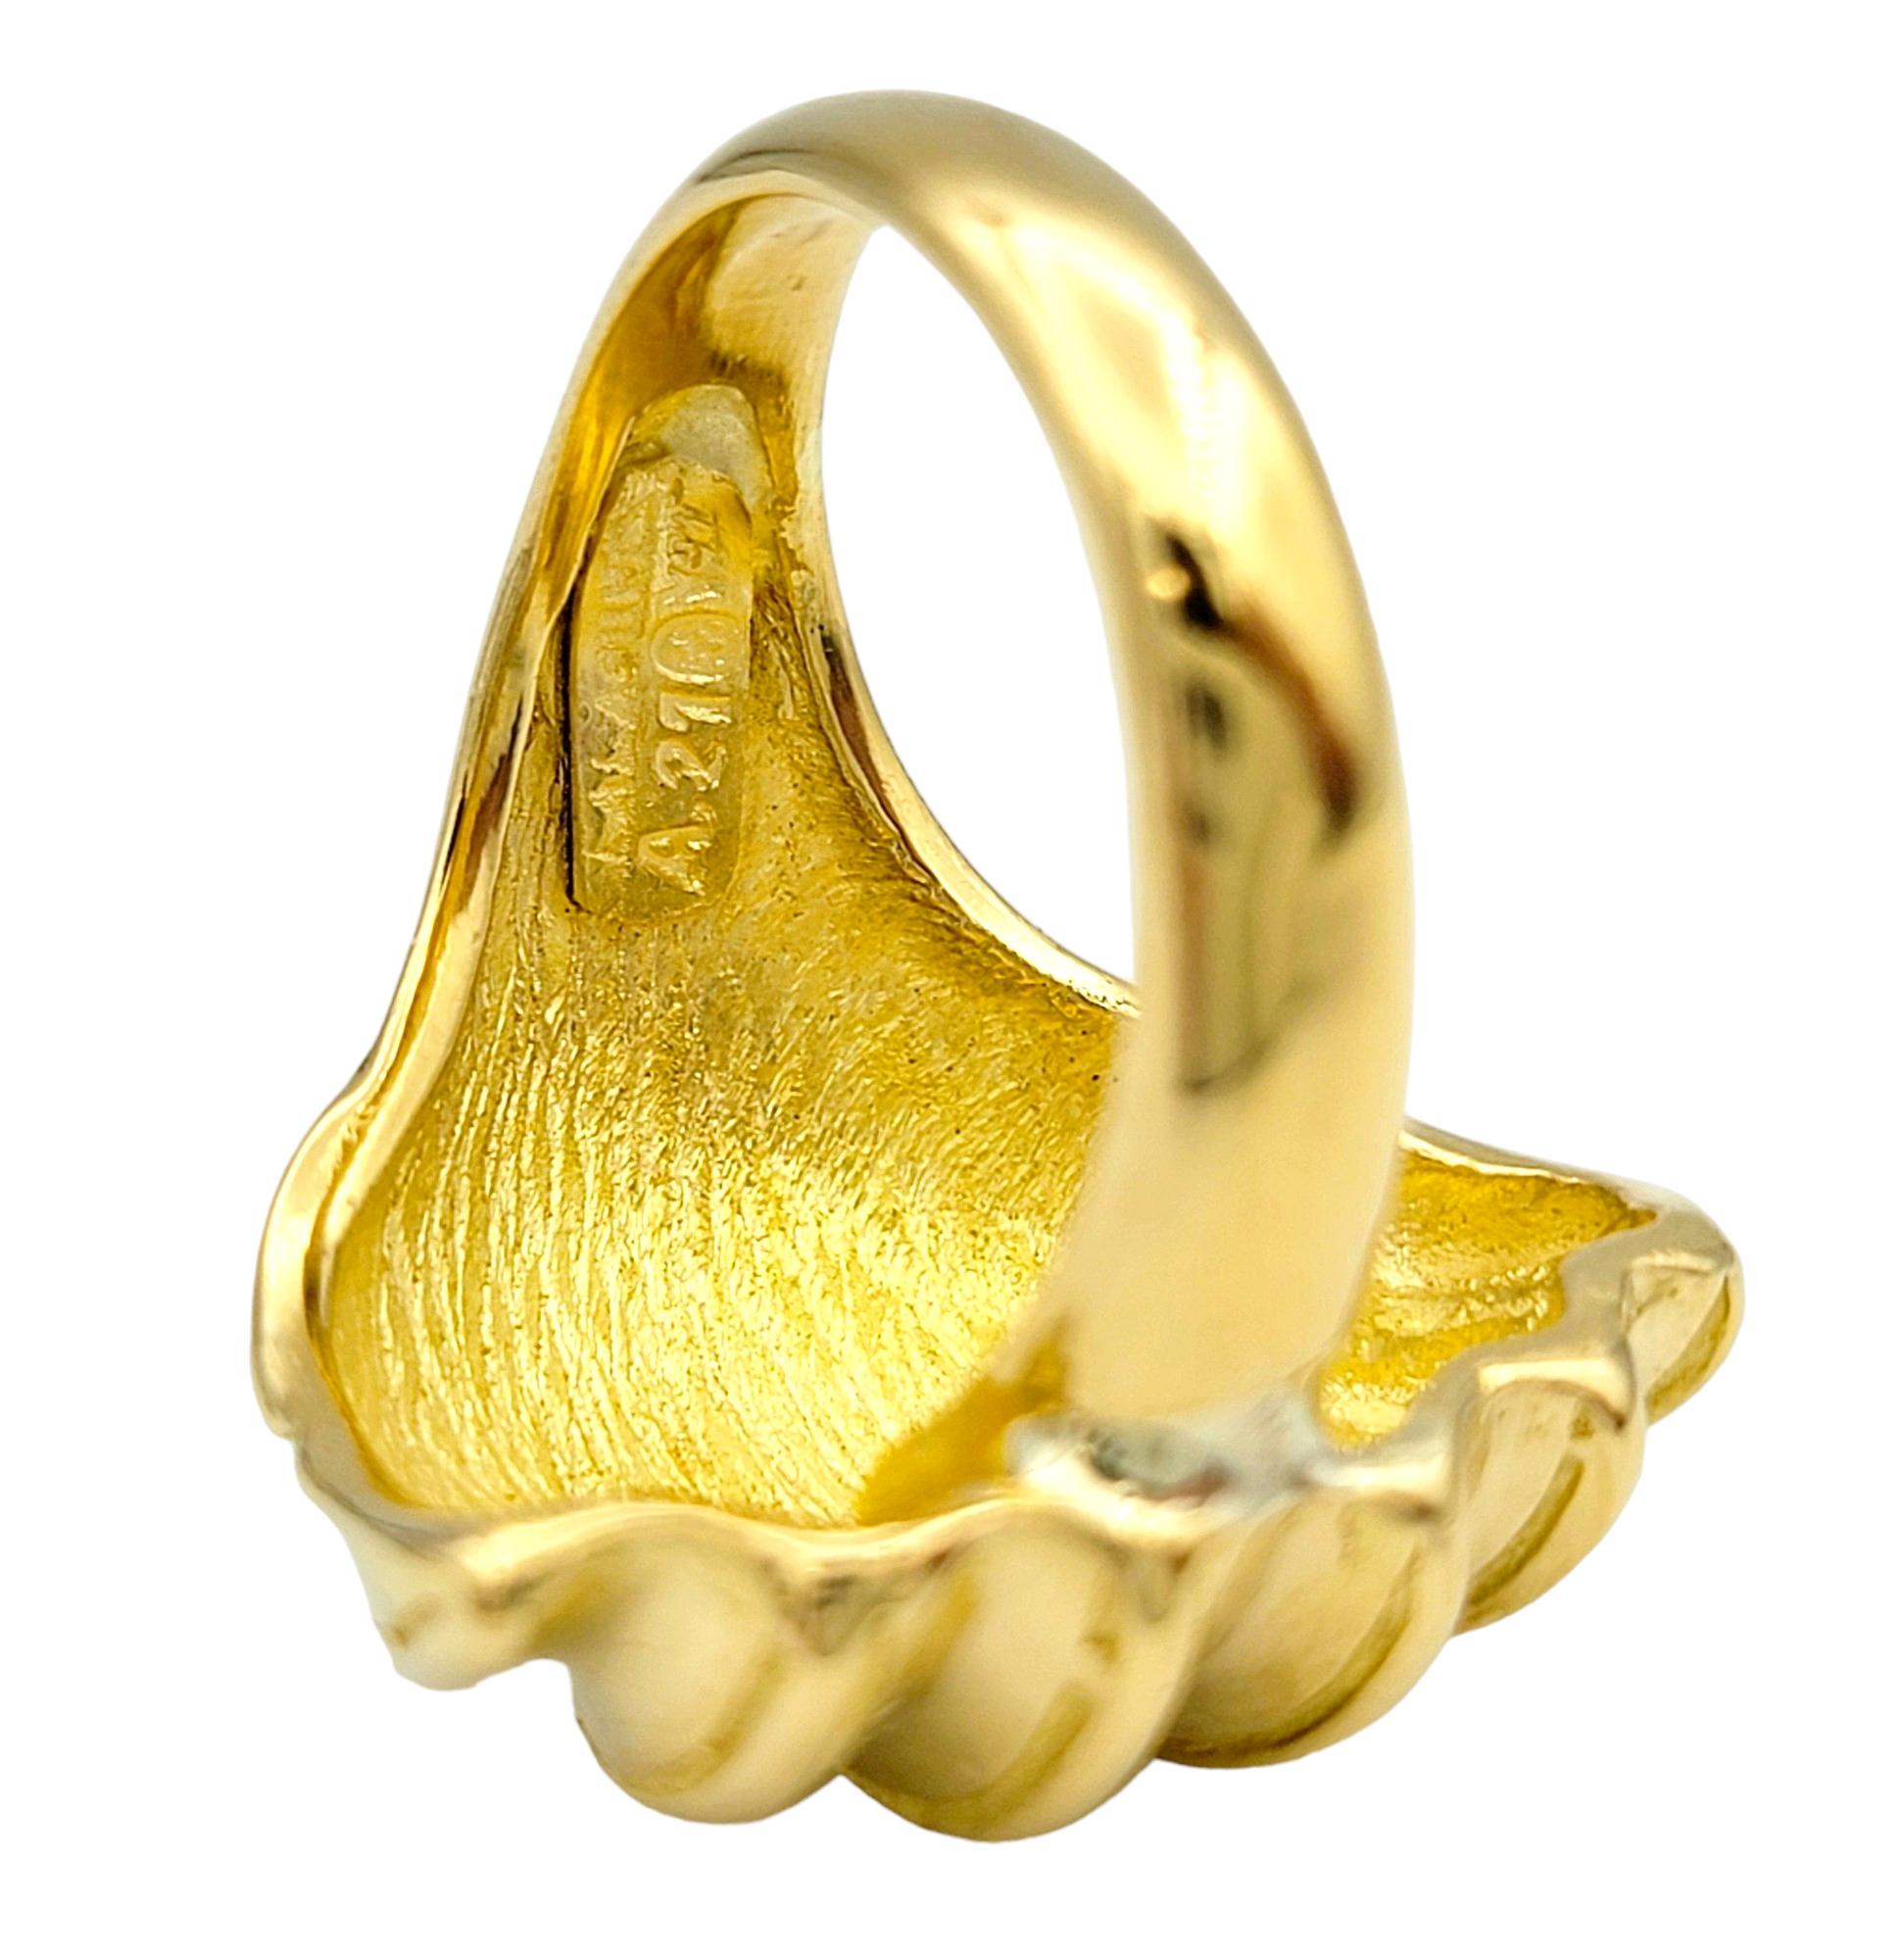 Illias Lalaounis Ridged Shell Design Wrap Cocktail Ring in 22 Karat Yellow Gold In Good Condition For Sale In Scottsdale, AZ